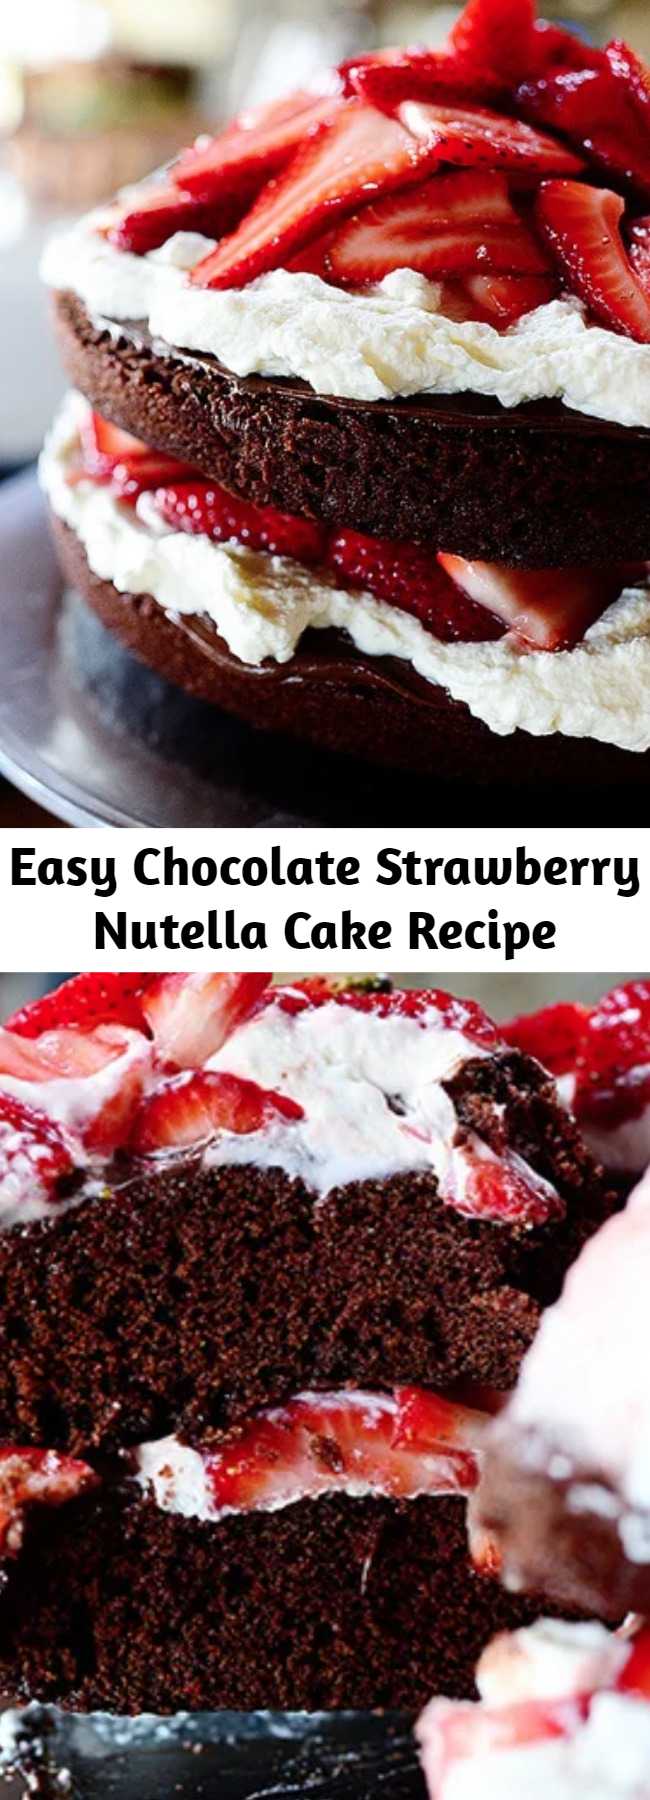 Easy Chocolate Strawberry Nutella Cake Recipe - A super easy chocolate layer cake with the deliciousness of strawberries and whipped cream (with a little shot of Nutella!)